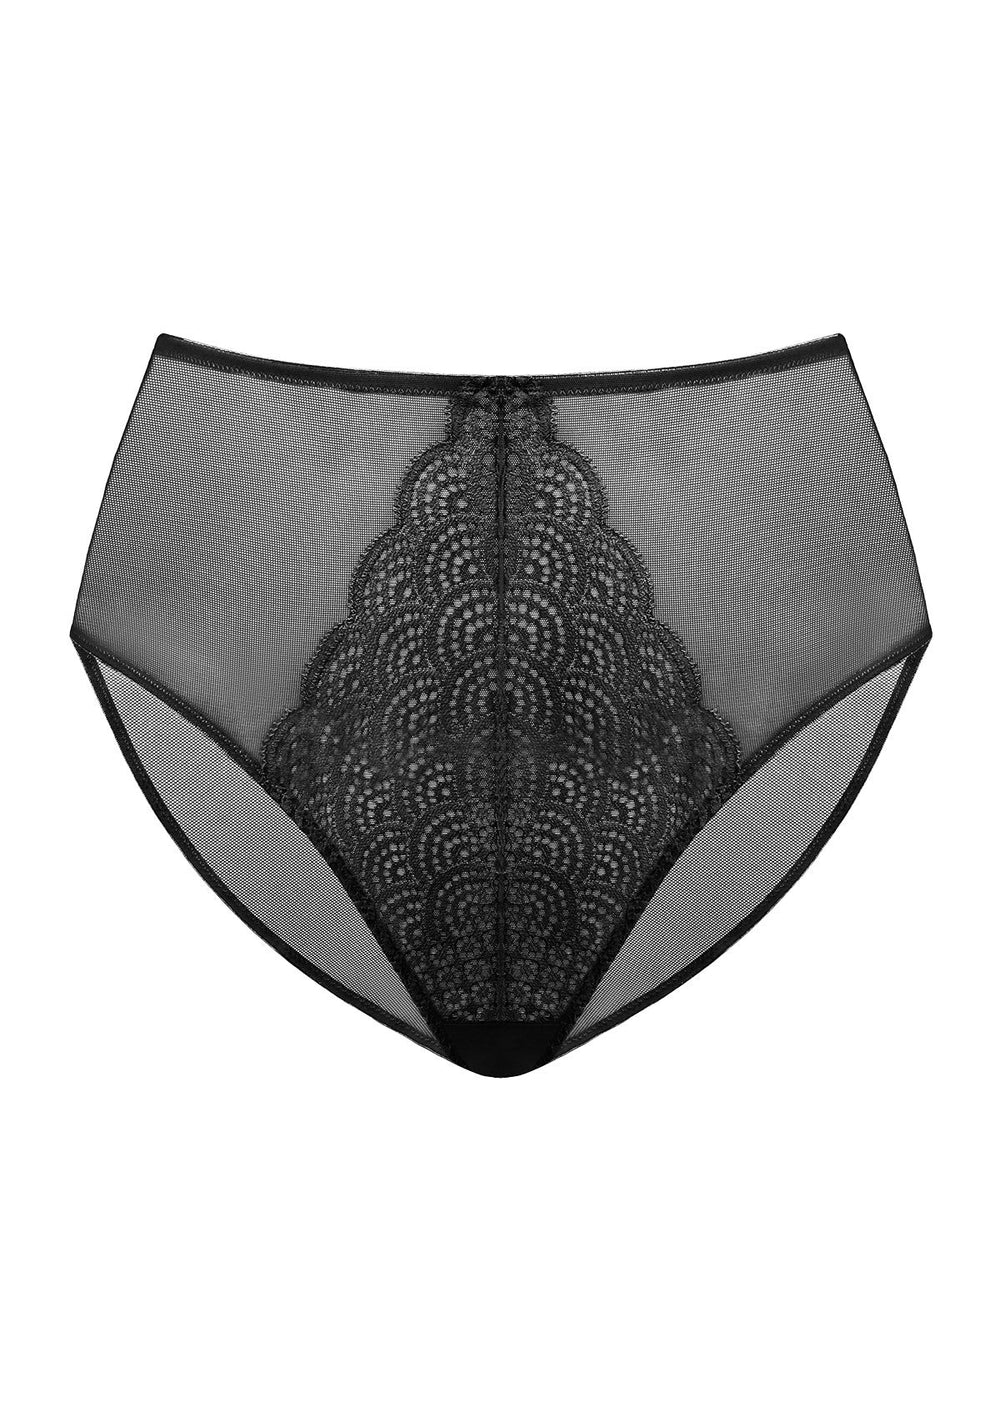 High Rise Lace Underwear For Women, Chic Brief Panties